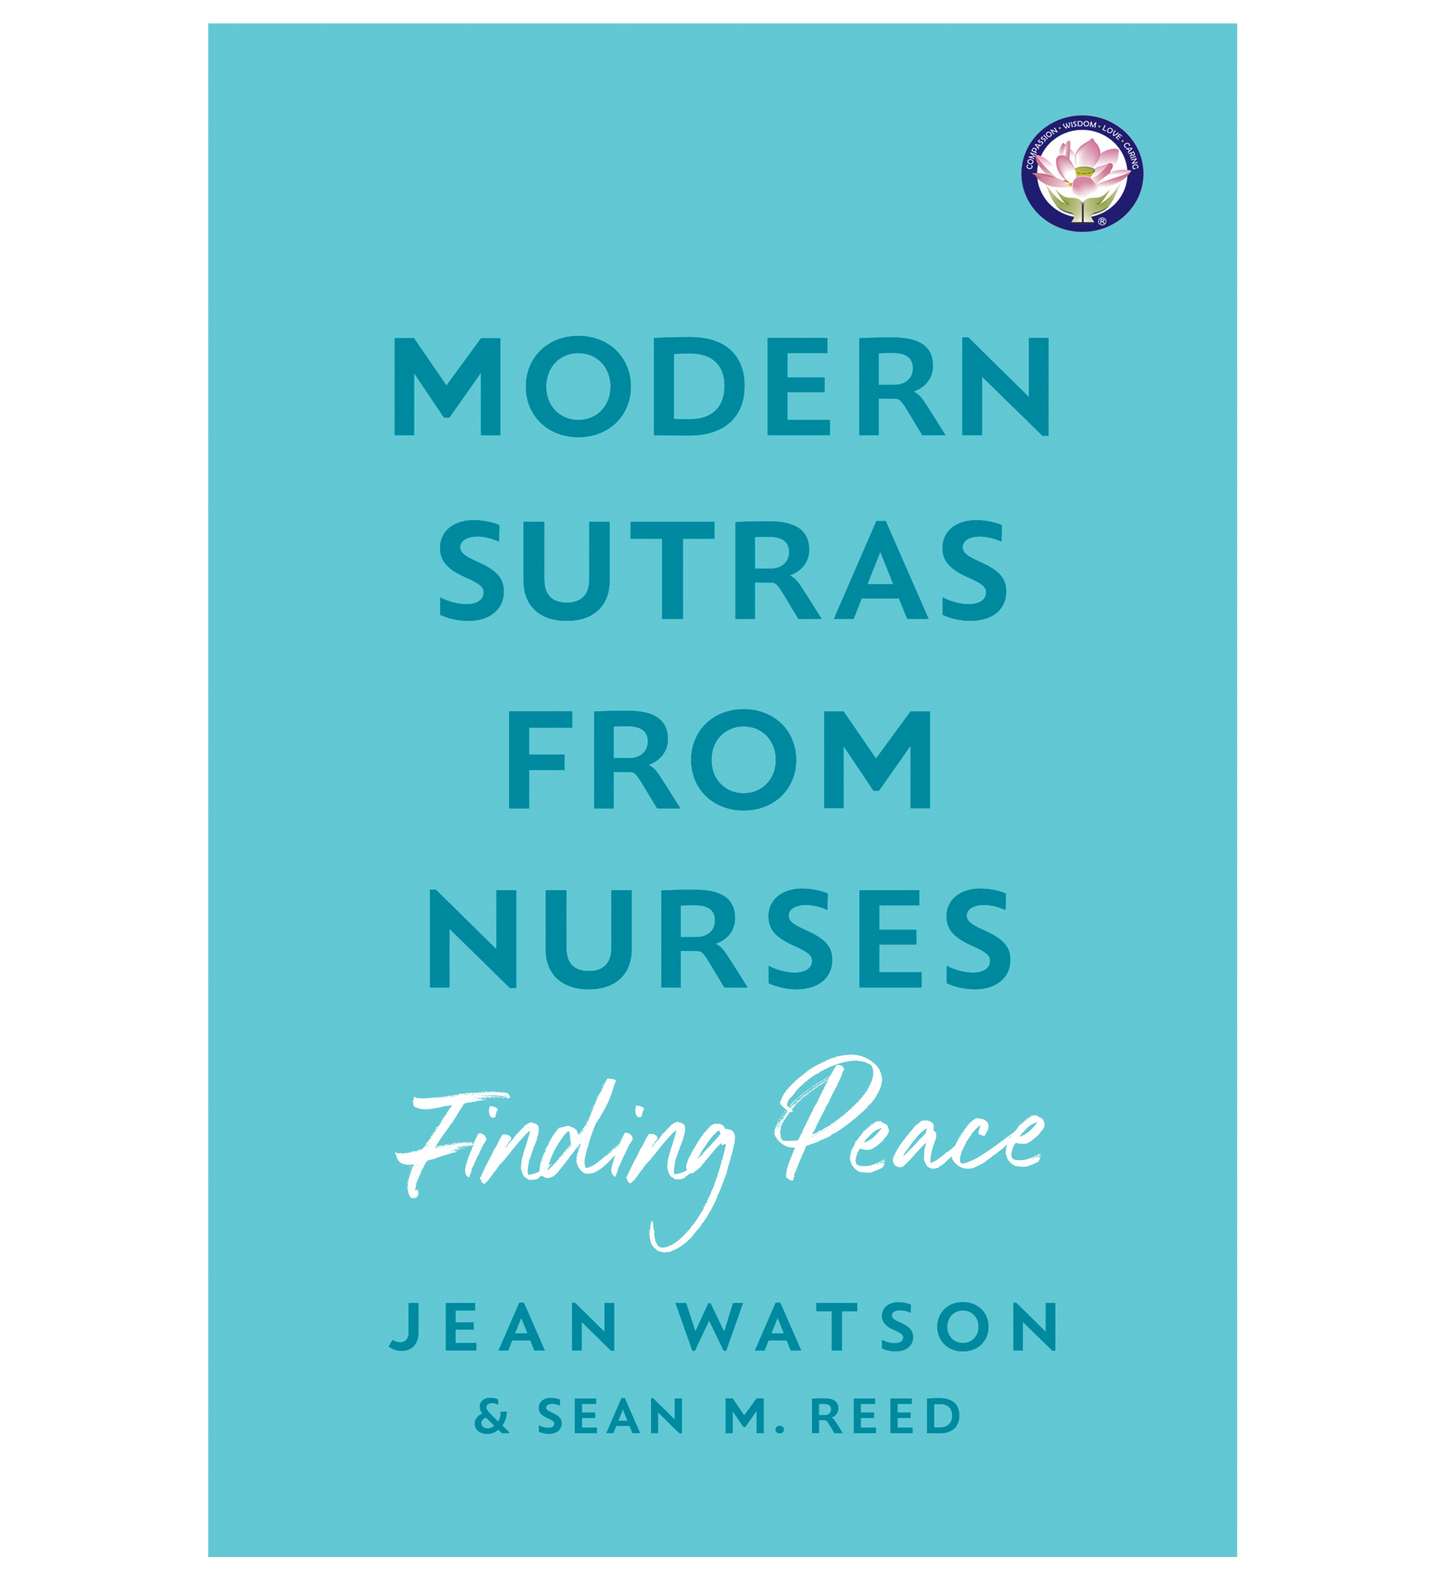 Modern Sutras from Nurses; Finding Peace (e-book)